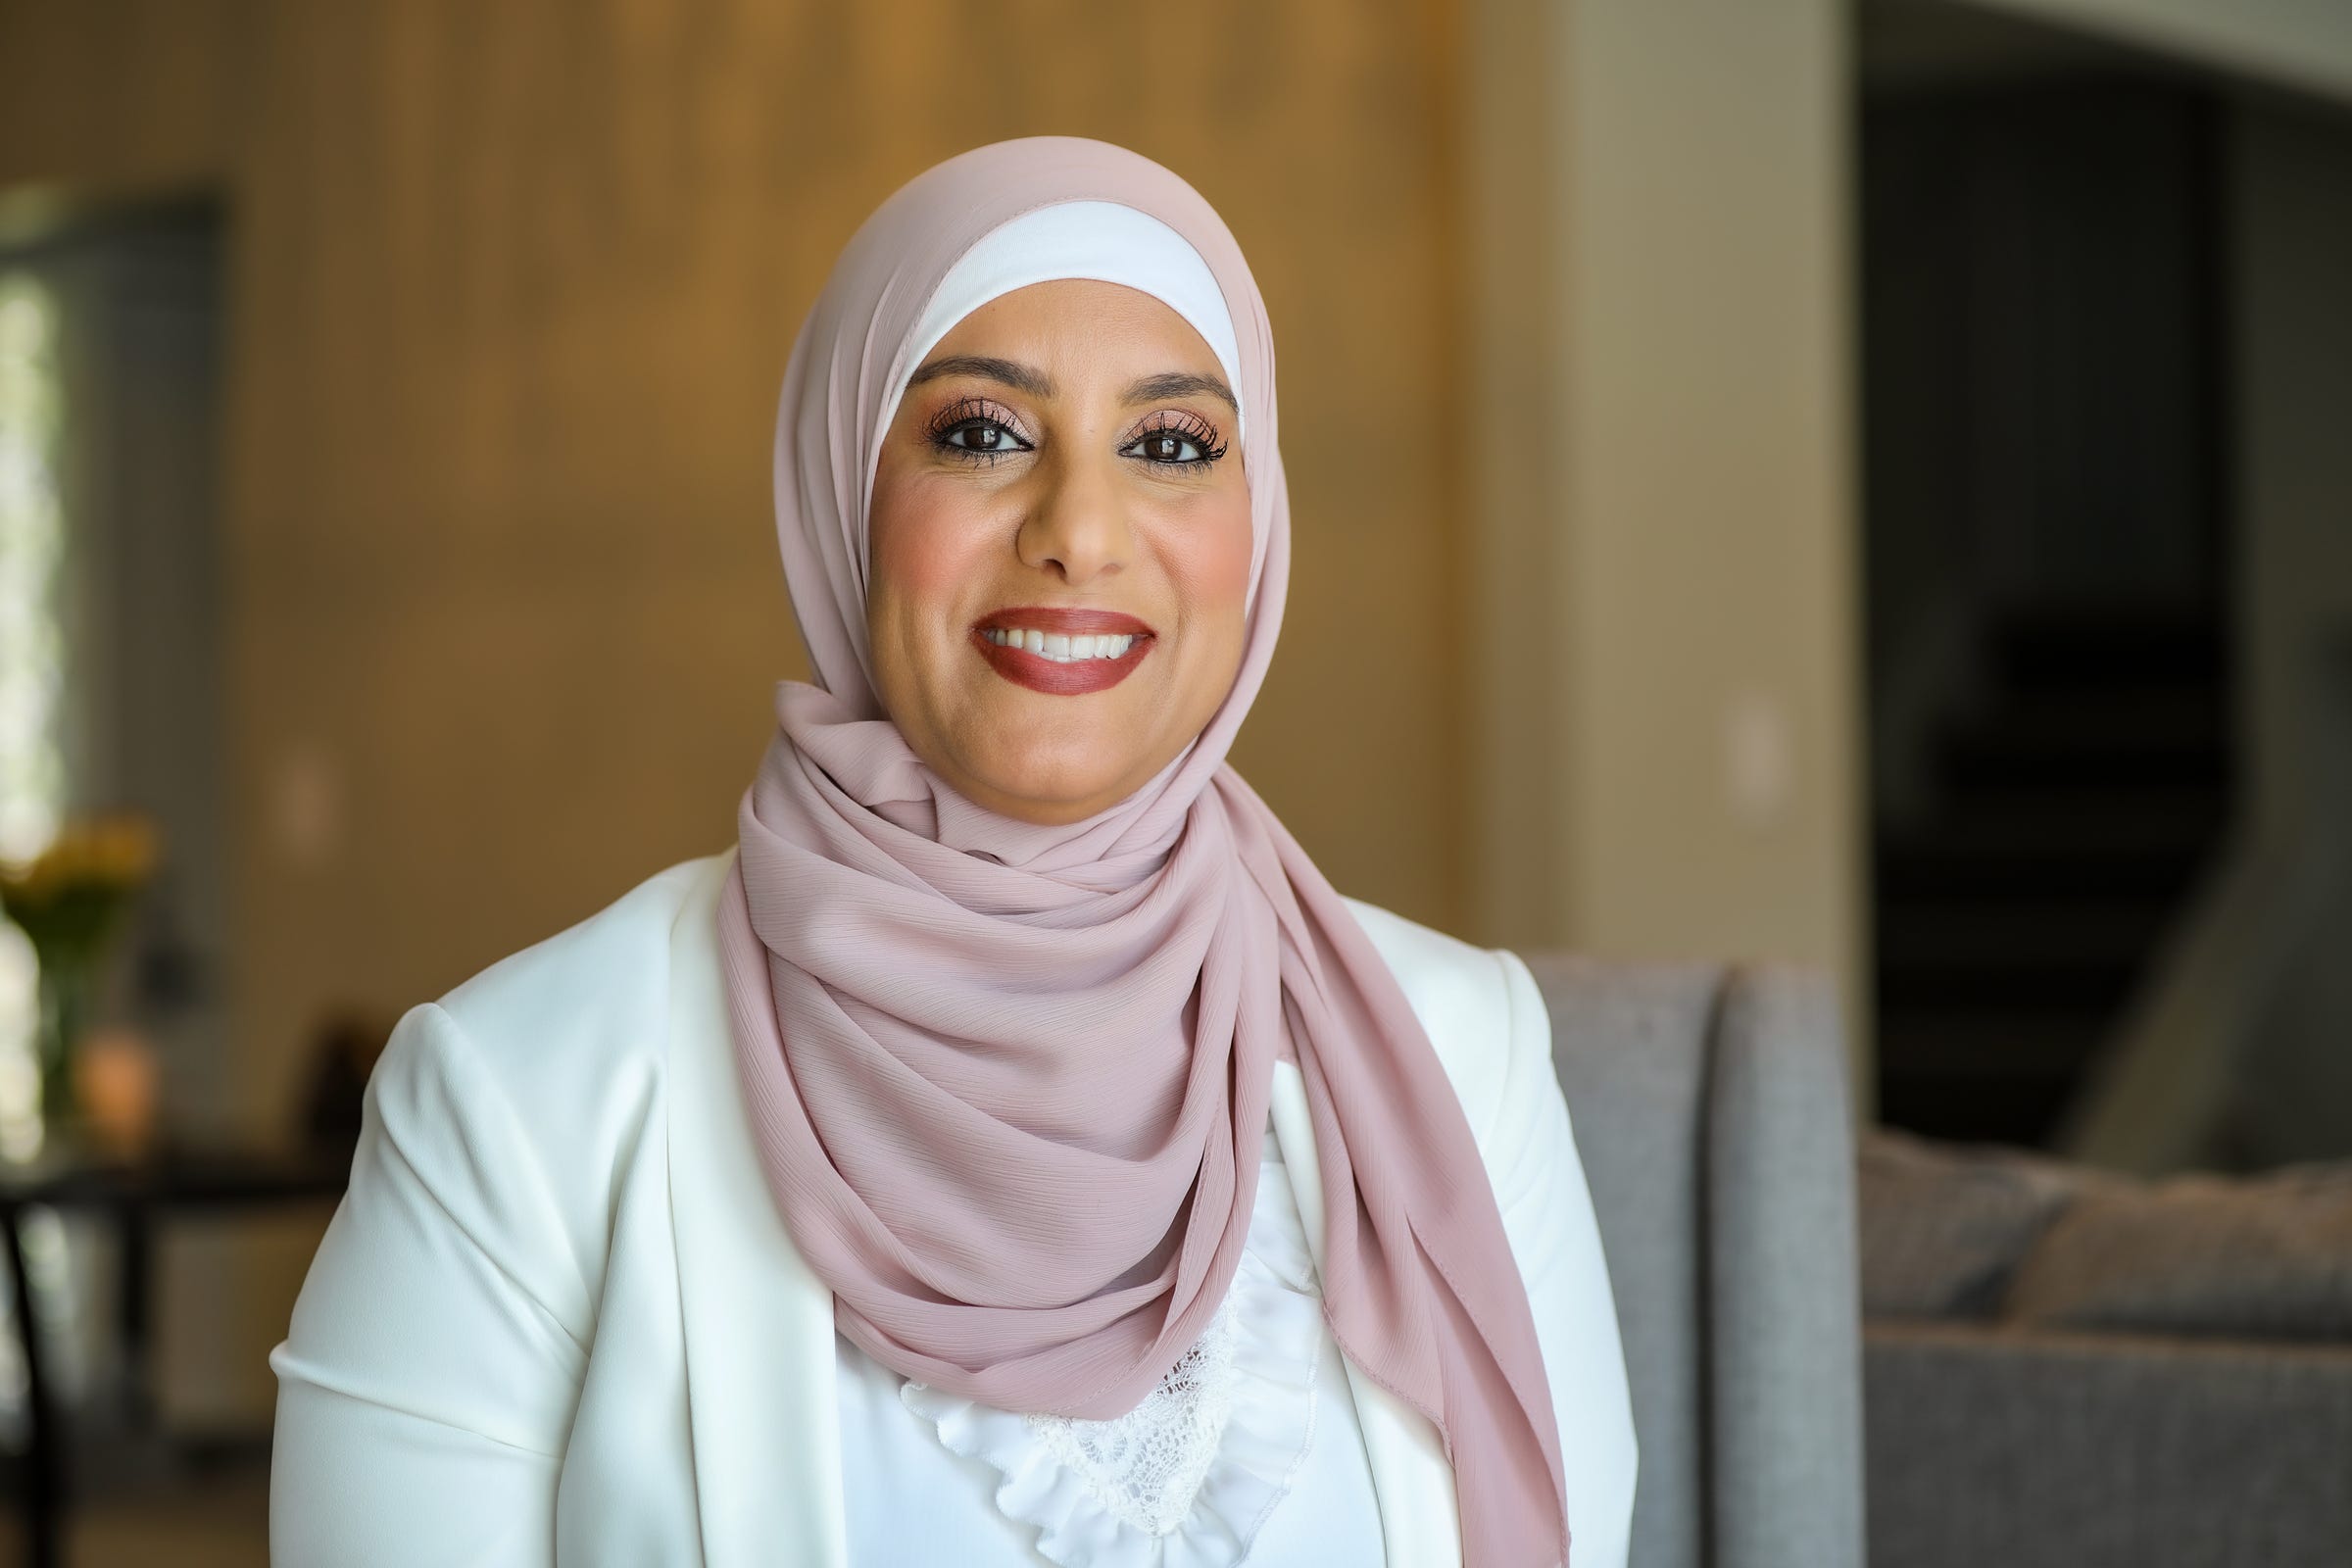 Nagwa Ali, 45, of Canton grew up as the only Muslim in her elementary school, letting her know at a young age she was different. Ali remembers when the 9/11 attacks happened a feeling of overwhelming sadness and the media drowning her thoughts. "So, you get to a point where you're just like, OK, I can't be on edge and I can't have anxiety about this," Ali said. "I just have to be able to move forward and, you know, develop that resilience and continue on." Ali is now the assistant principal at Allendale elementary in Allen Park raising two children. "If people form an opinion of who I am, then that's just simply their opinion of who I am," Ali said. "If it isn't an accurate representation of me, I'm not going to let it define who I am."